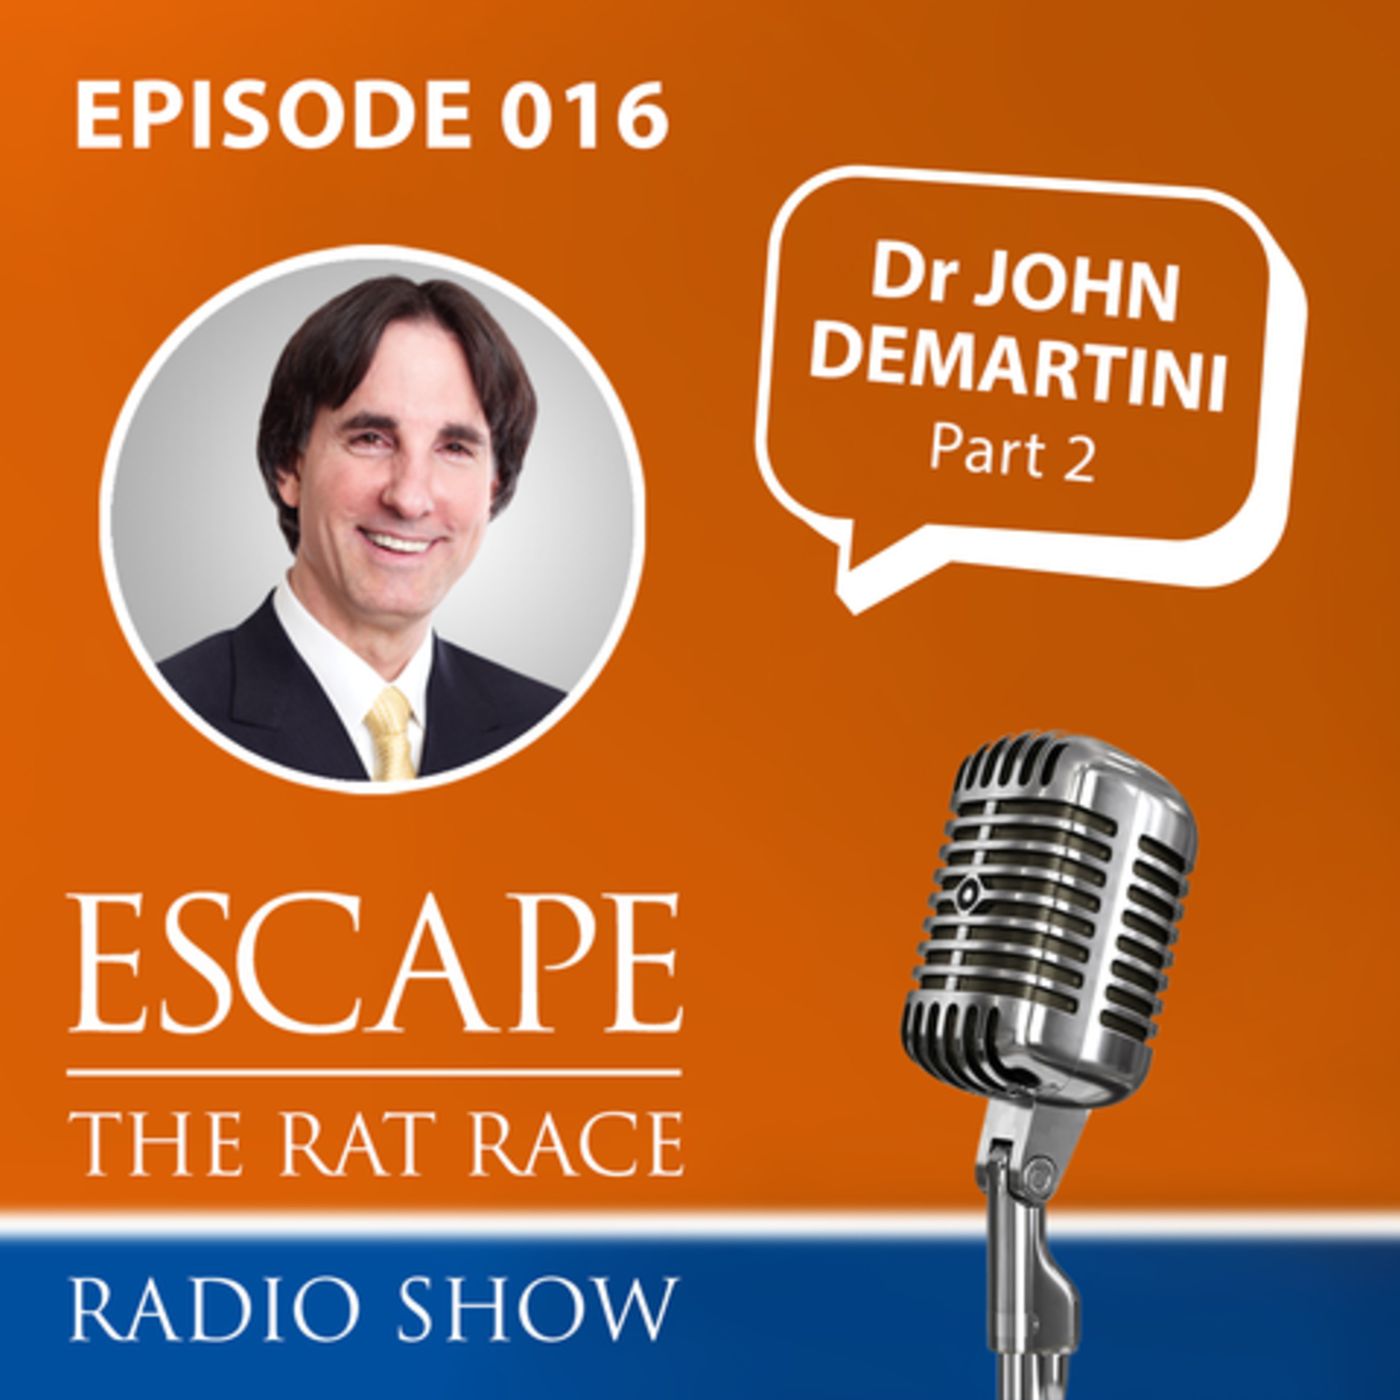 Dr John Demartini - How To Find Your True Purpose And Live An Inspired And Fulfilling Life (Part 2)